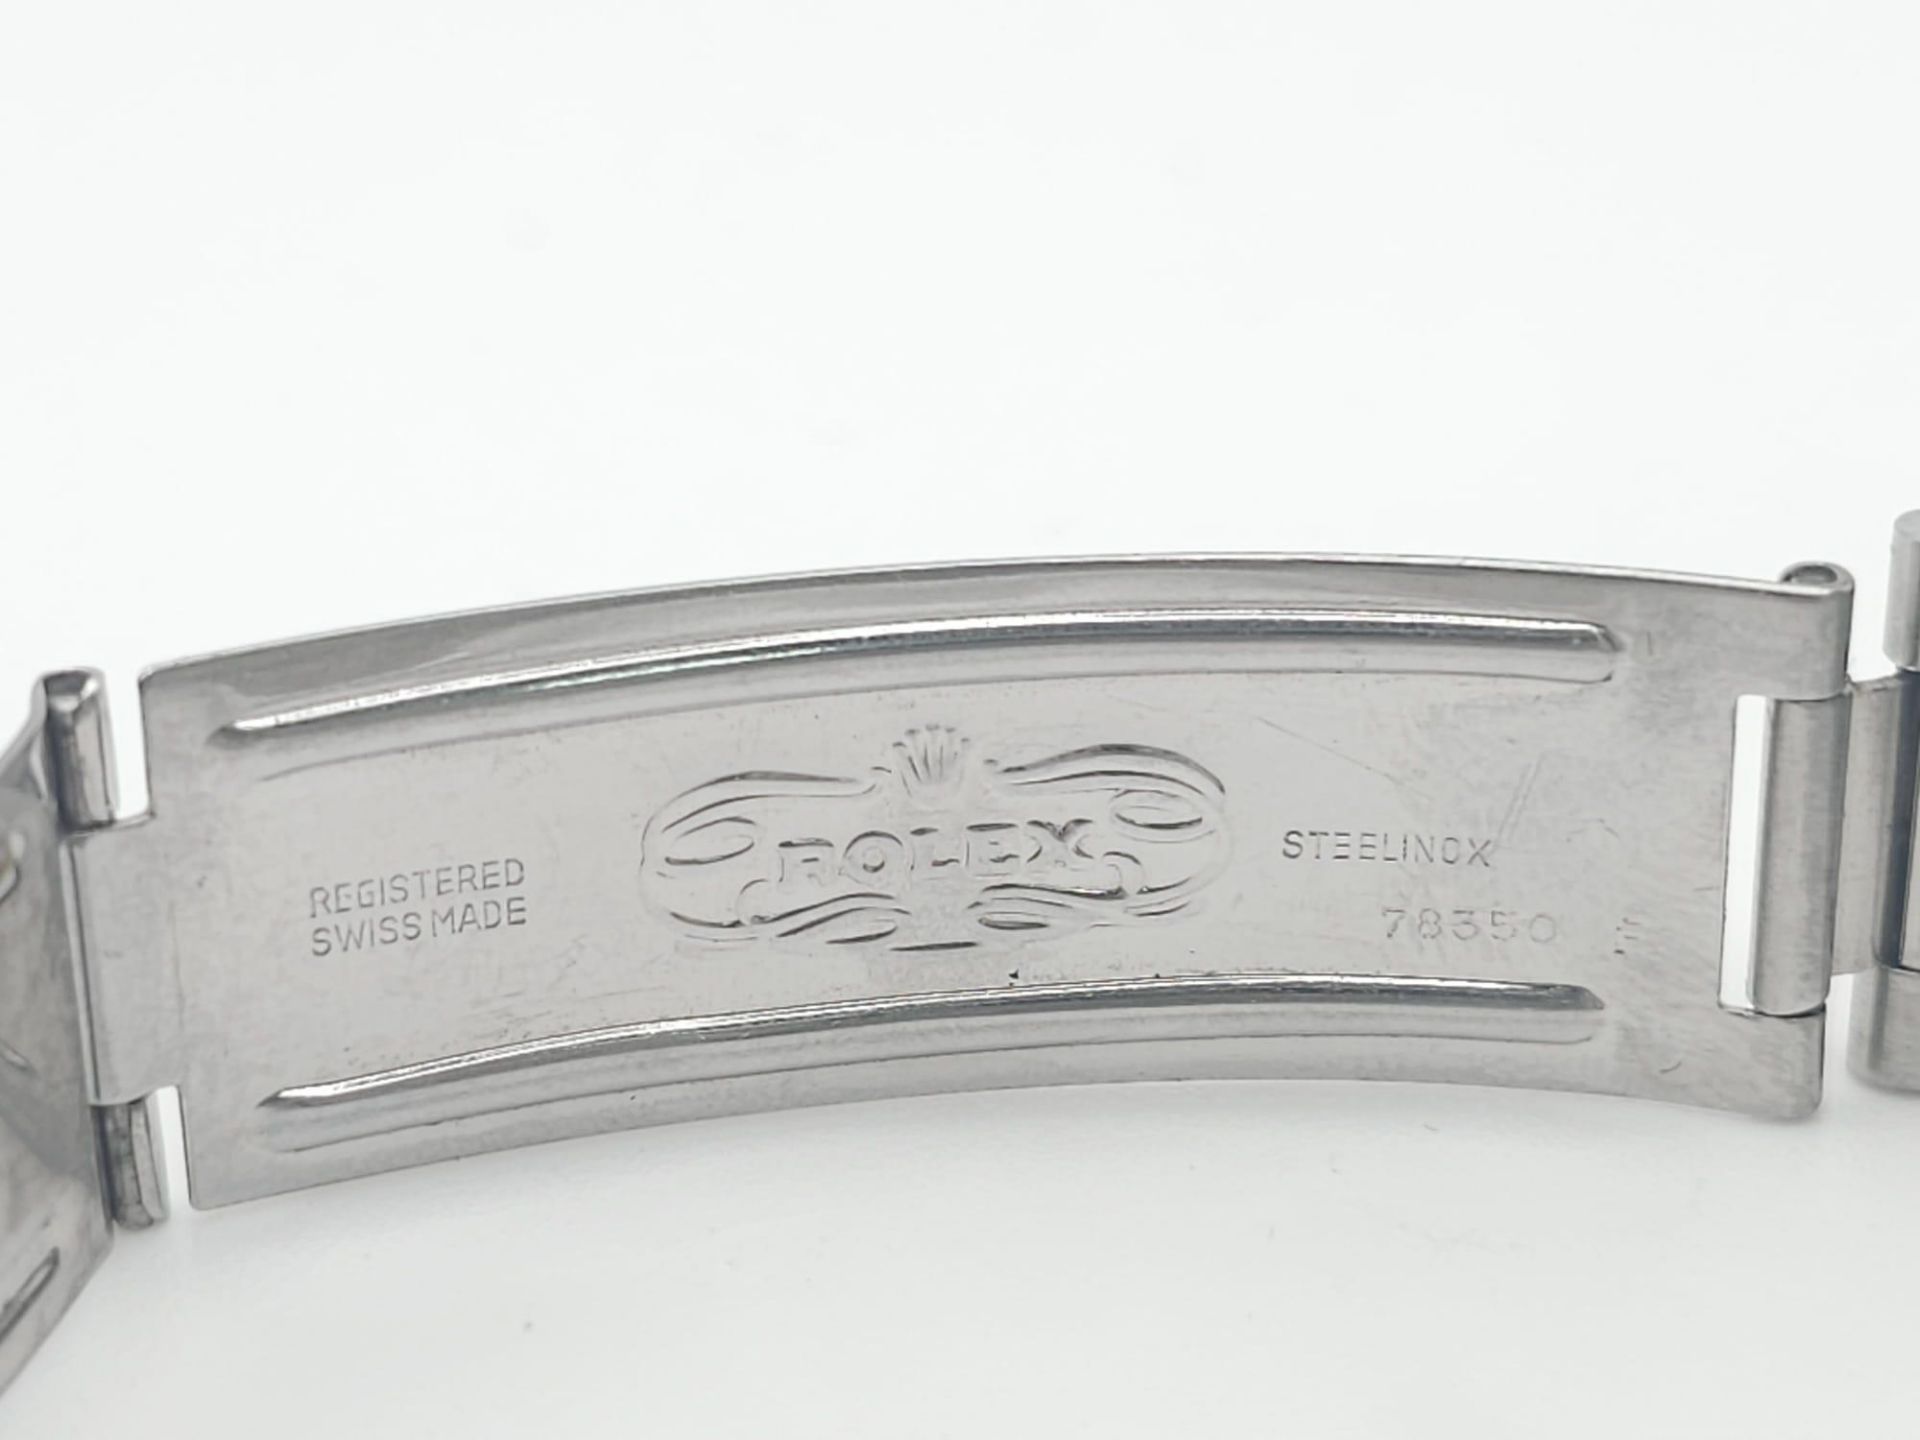 A ROLEX OYSTERDATE IN STAINLESS STEEL SPORTING THE EAGLE LOGO OF ABU DHABI .(DIAL NEEDS CLEANING) - Image 9 of 13